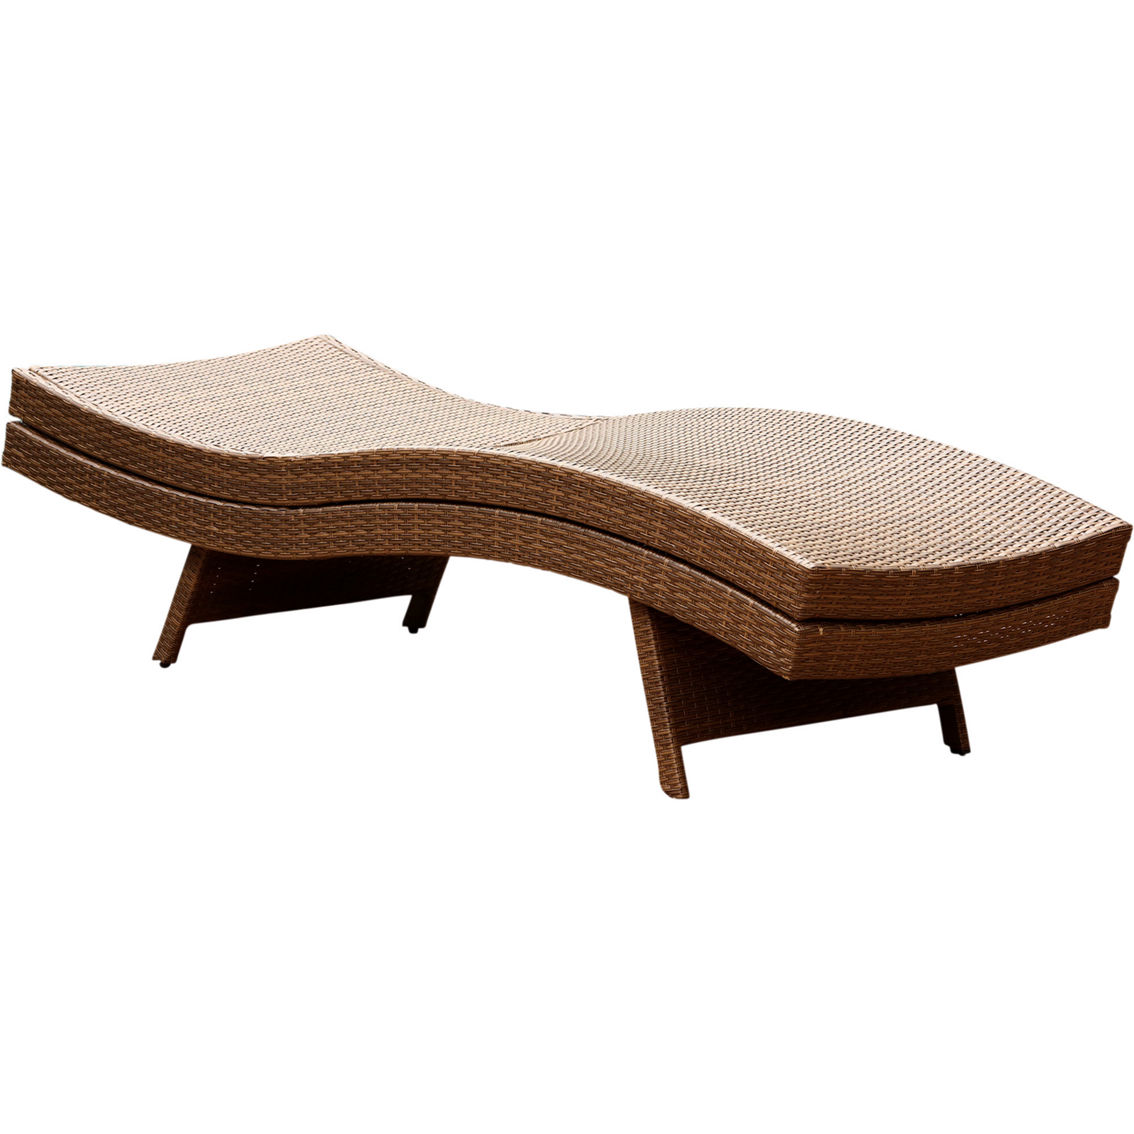 Abbyson Everly Outdoor Wicker Chaise Lounger 2 pk. - Image 2 of 4